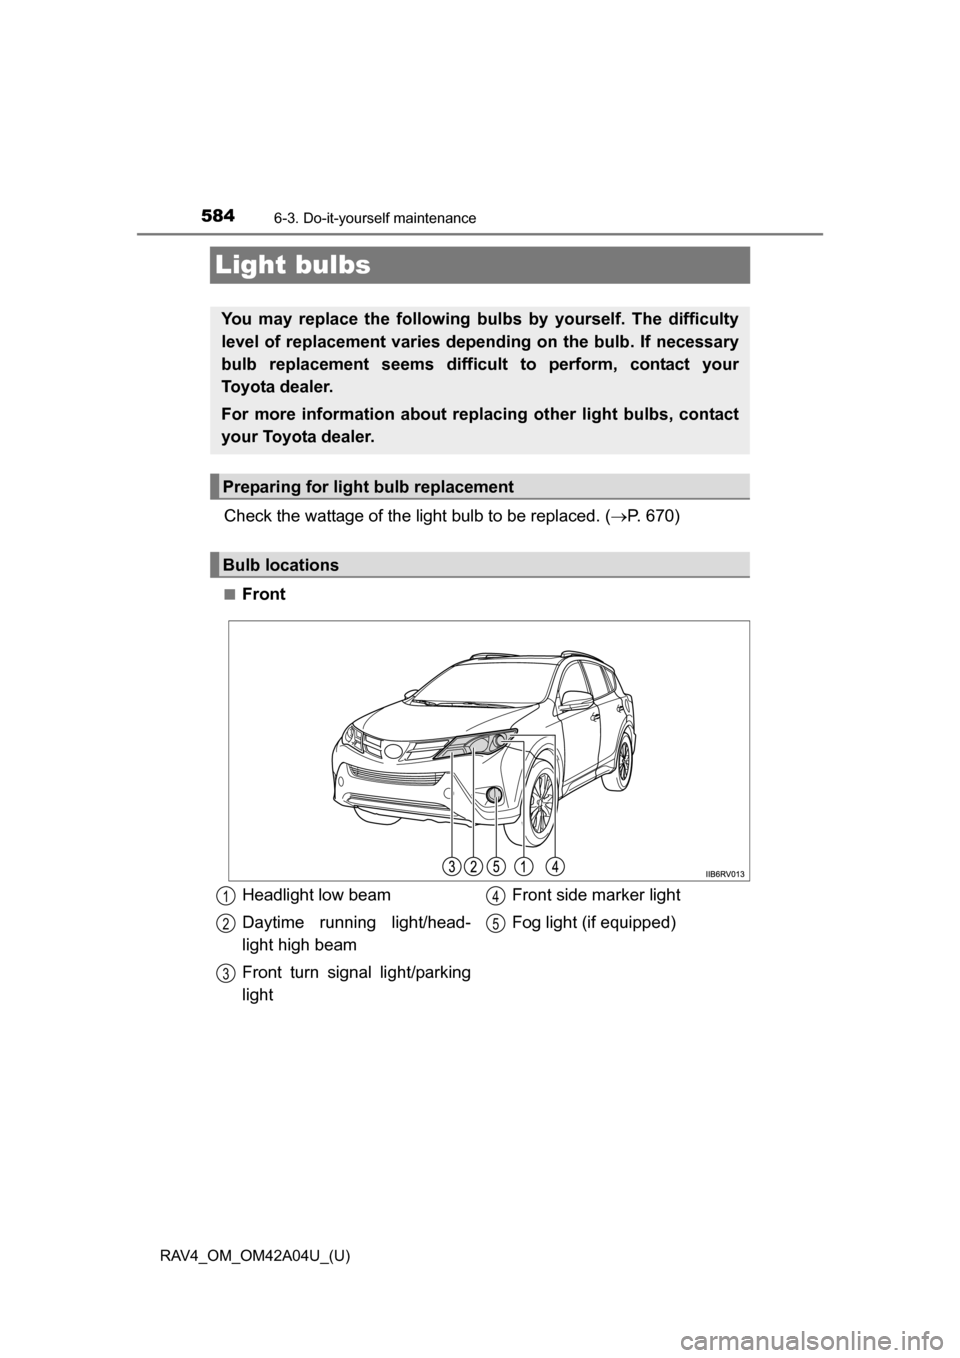 TOYOTA RAV4 2014 XA40 / 4.G Owners Manual 584
RAV4_OM_OM42A04U_(U)
6-3. Do-it-yourself maintenance
Light bulbs
Check the wattage of the light bulb to be replaced. (P. 670)
■Front
You may replace the following bulbs  by yourself. The diff